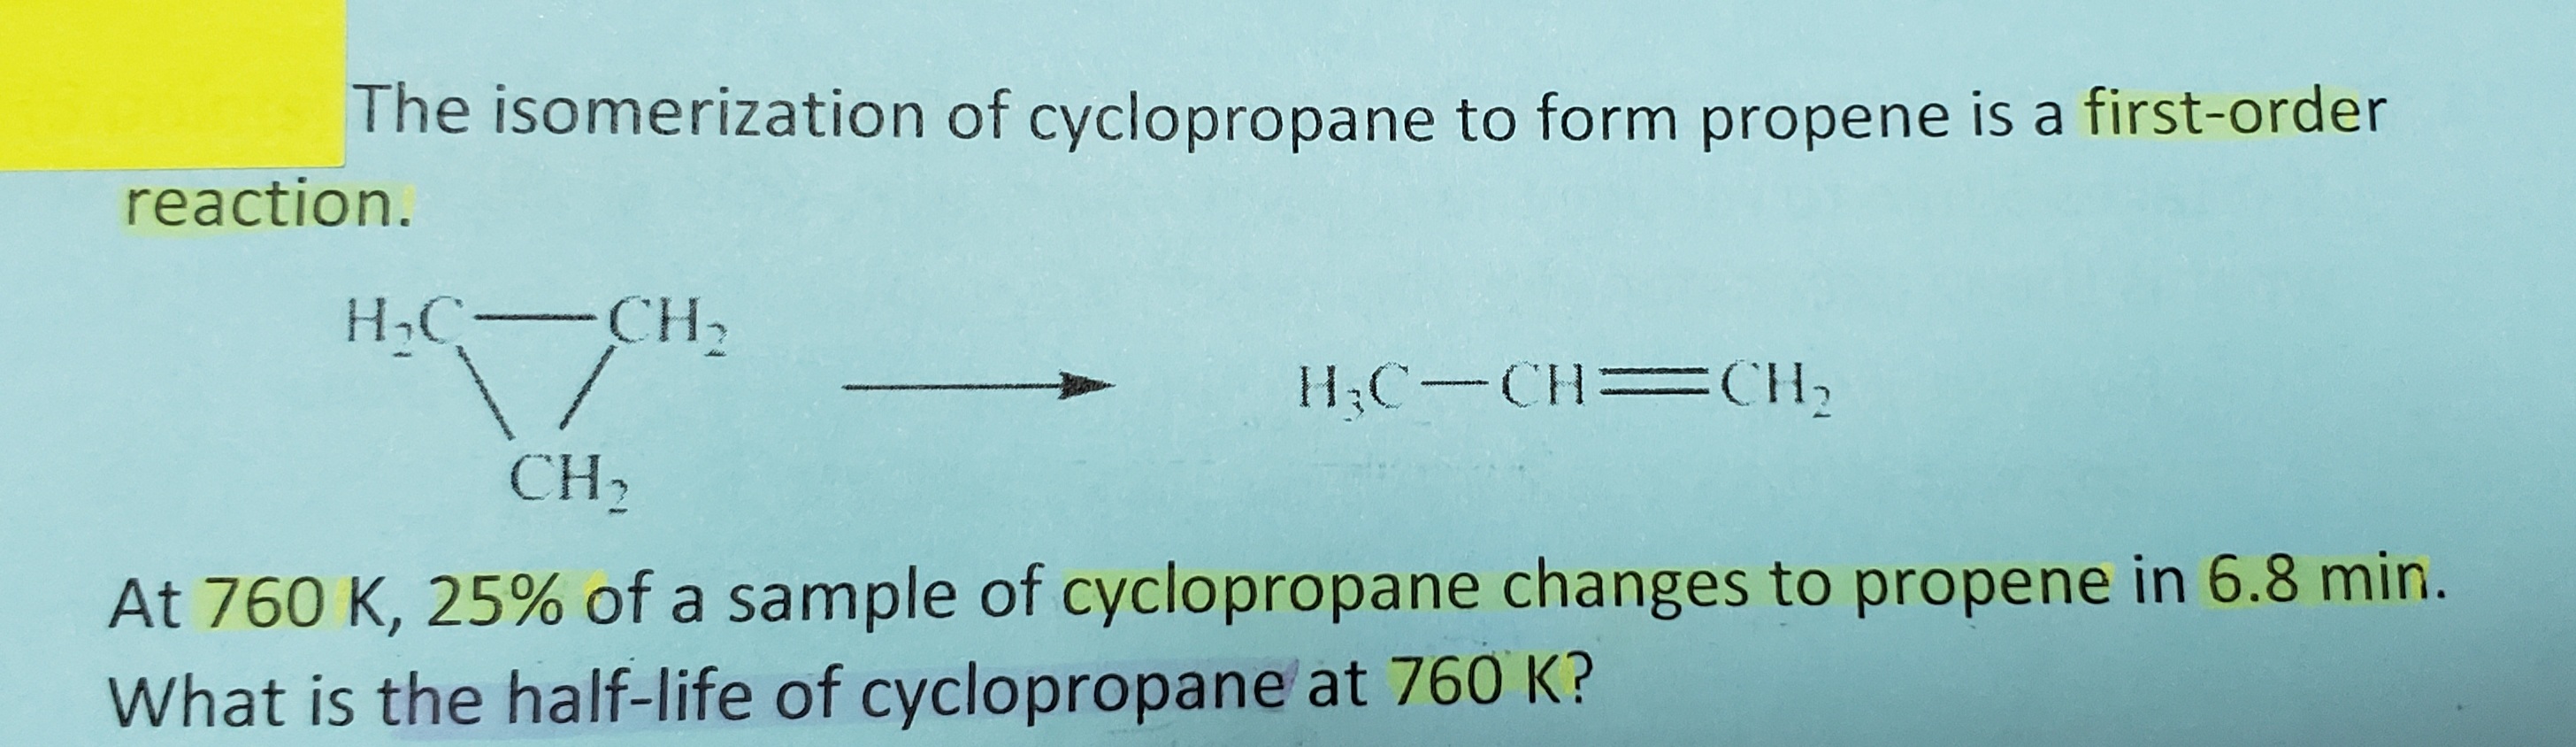 The isomerization of cyclopropane to form propene is a first-order
reaction.
HC-CH2
H;C-CH=CH2
CH2
At 760 K, 25% of a sample of cyclopropane changes to propene in 6.8 min.
What is the half-life of cyclopropane at 760 K?
